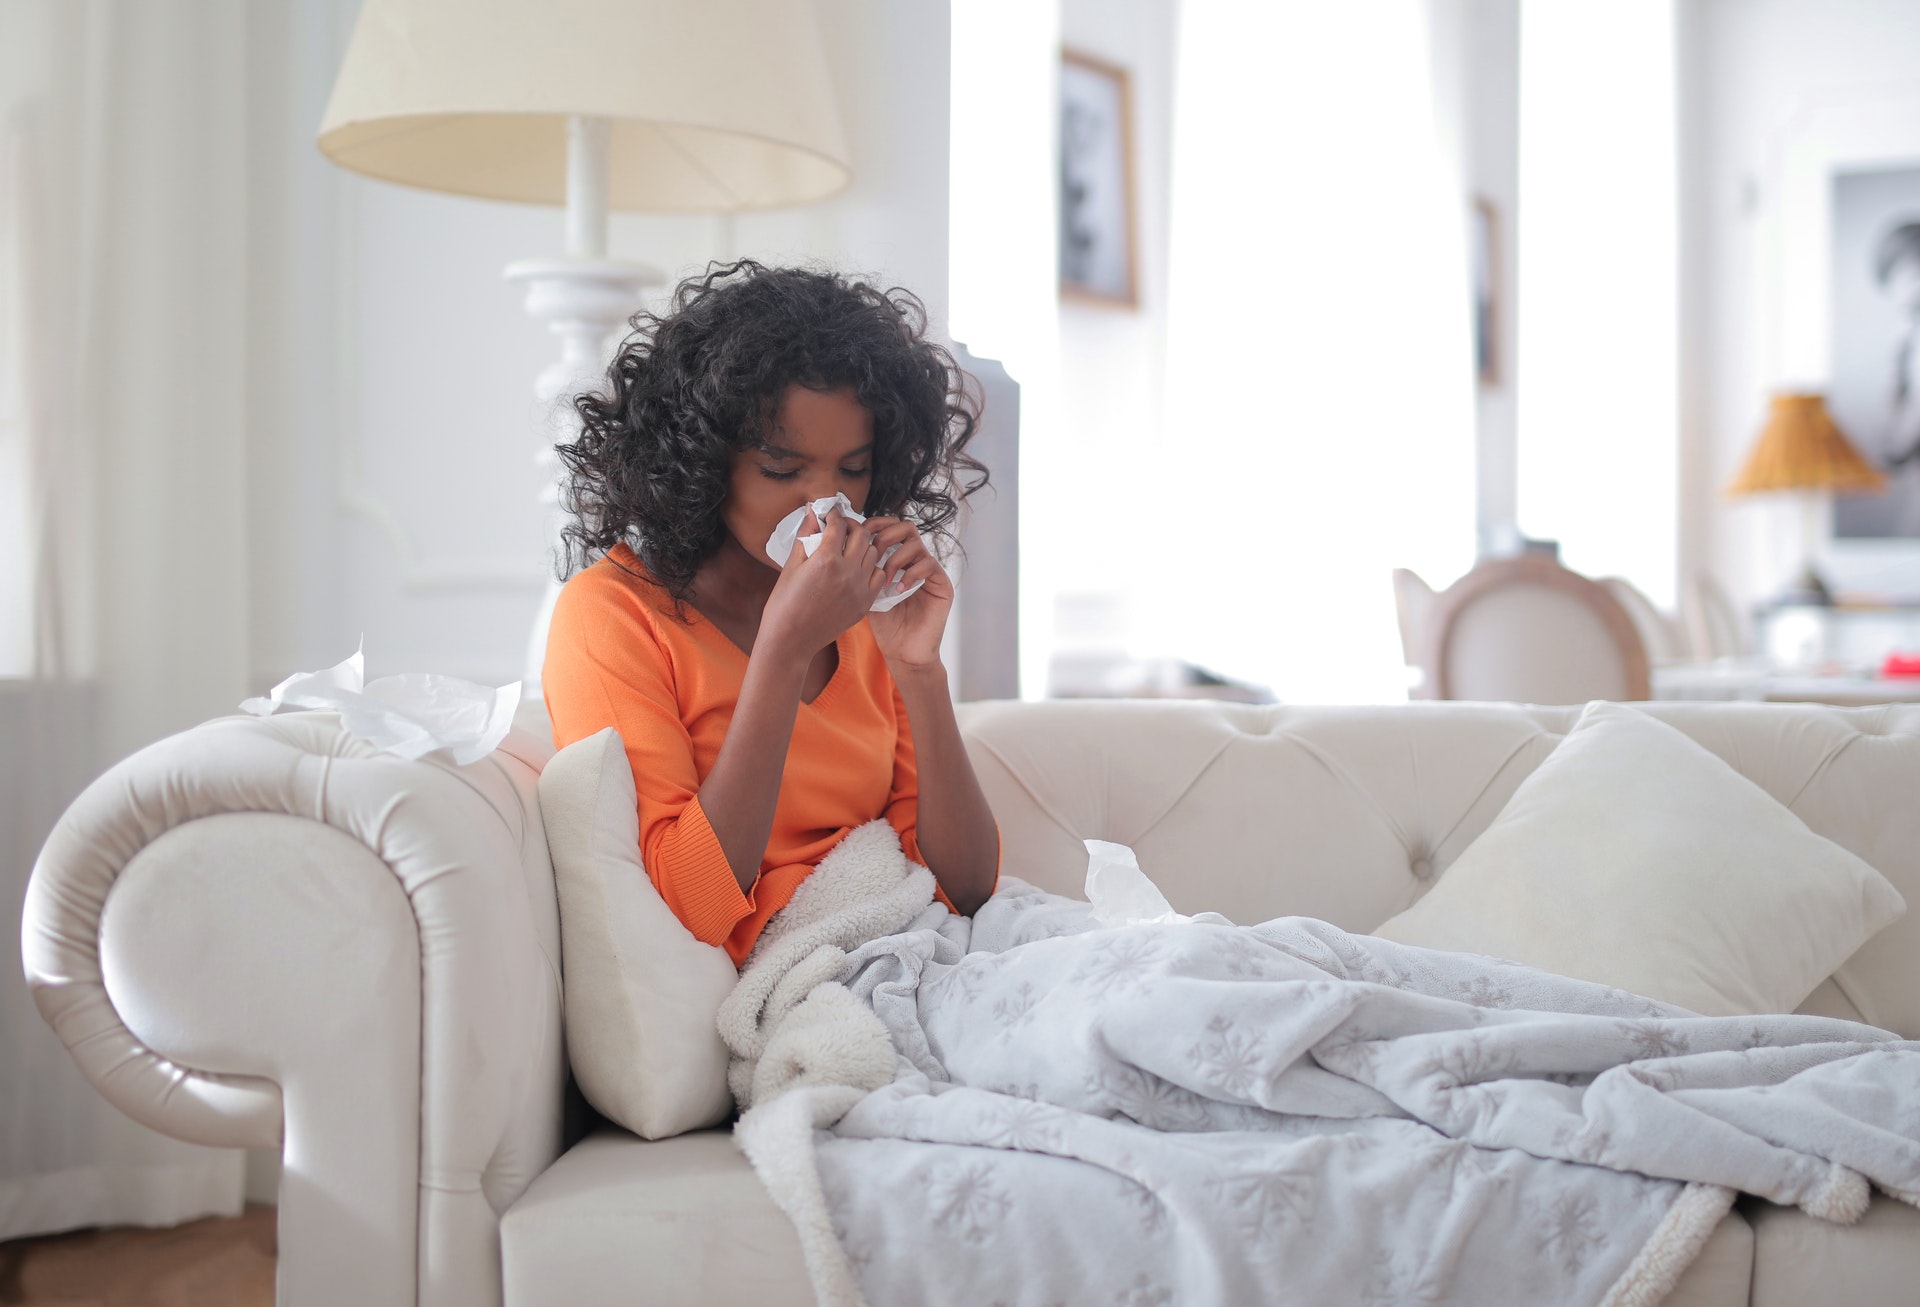 Woman on a couch wrapped in a blanket, sneezing